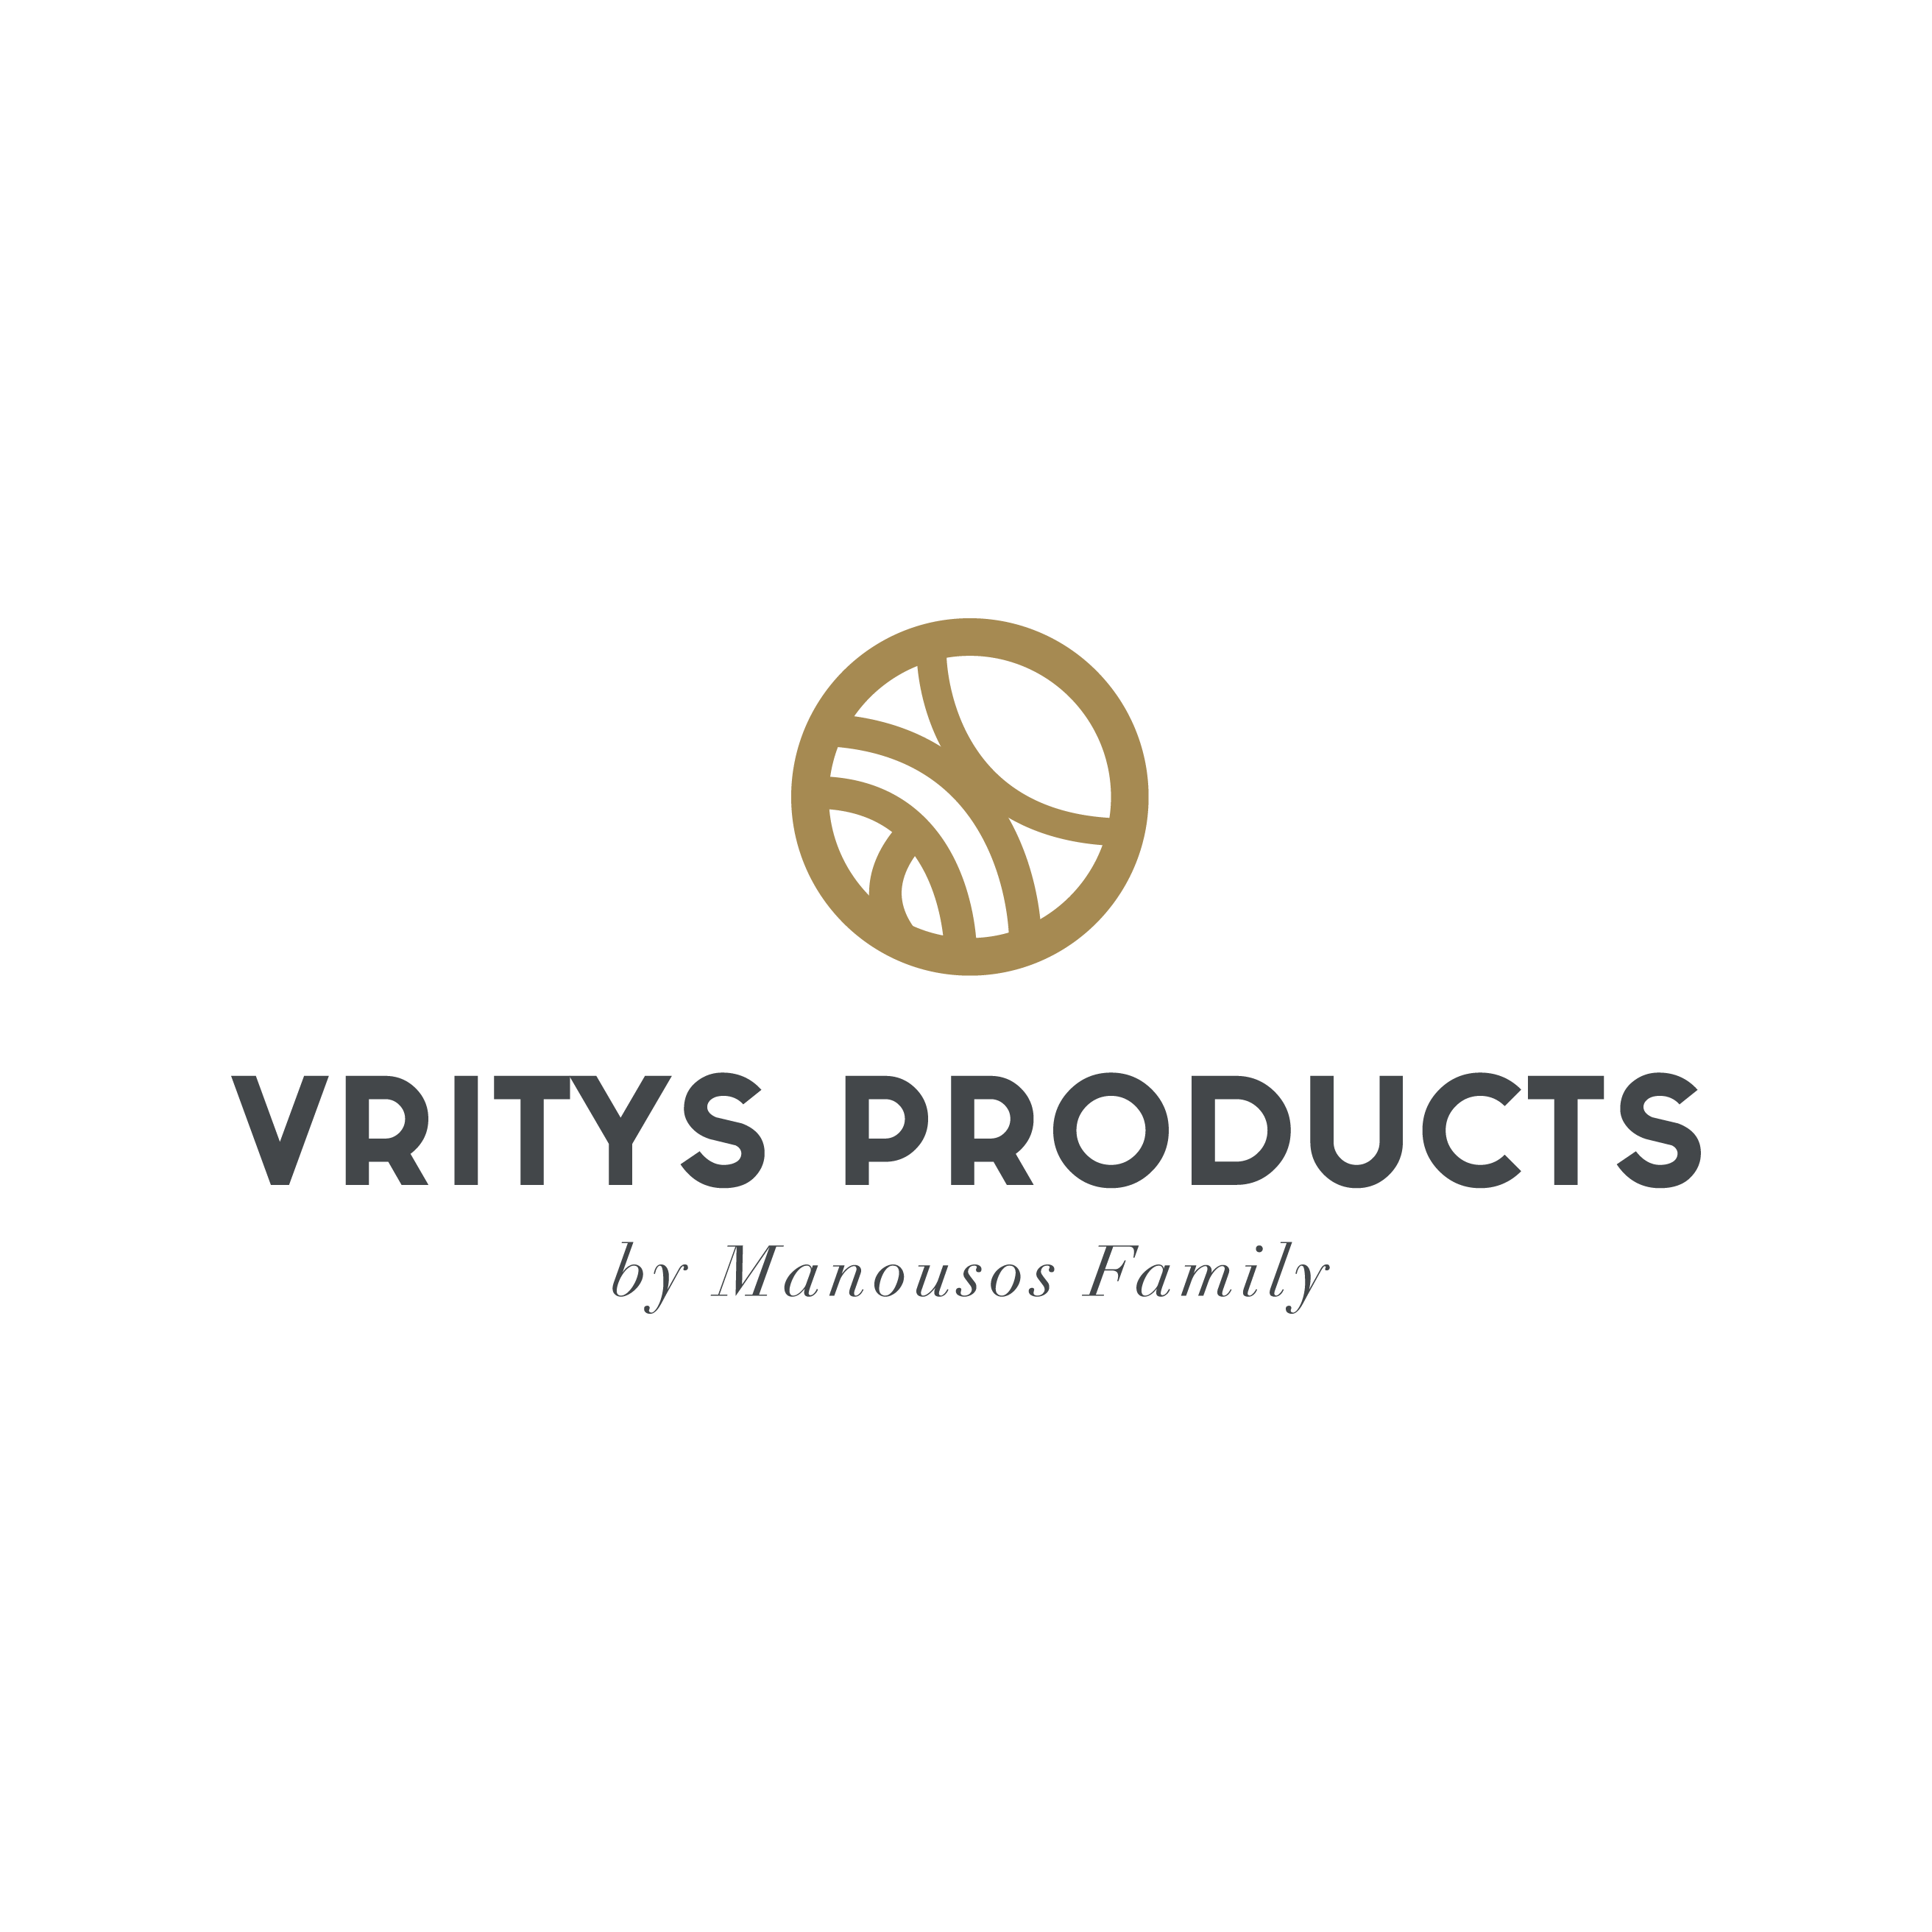 VRITYS PRODUCTS BY MANOUSOS FAMILY SINGLE MEMBER P. C.